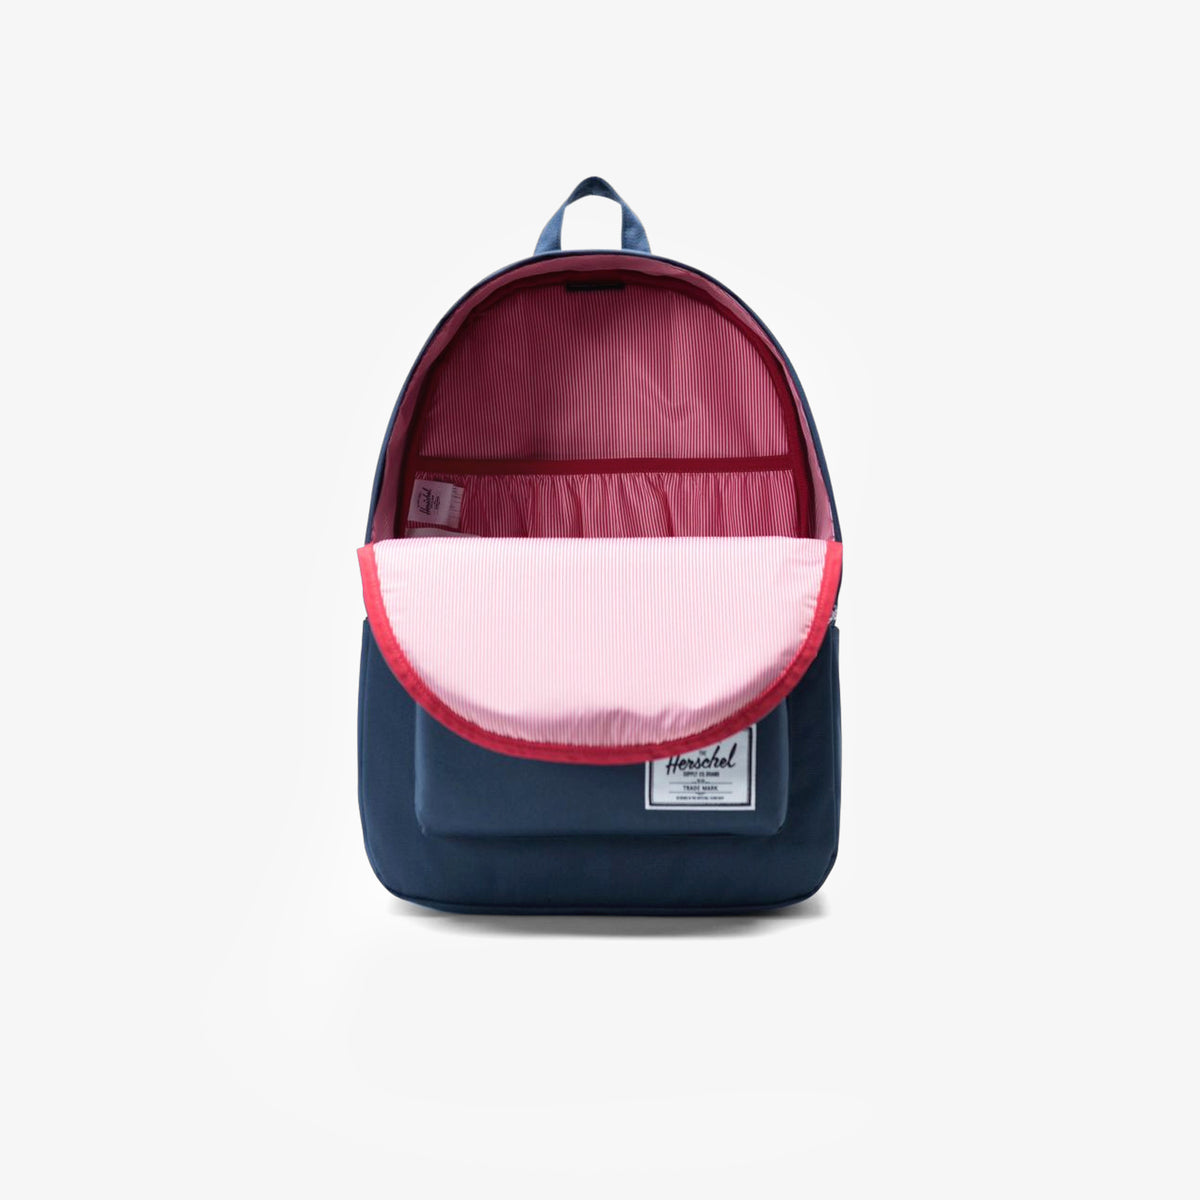 Classic Backpack - Navy